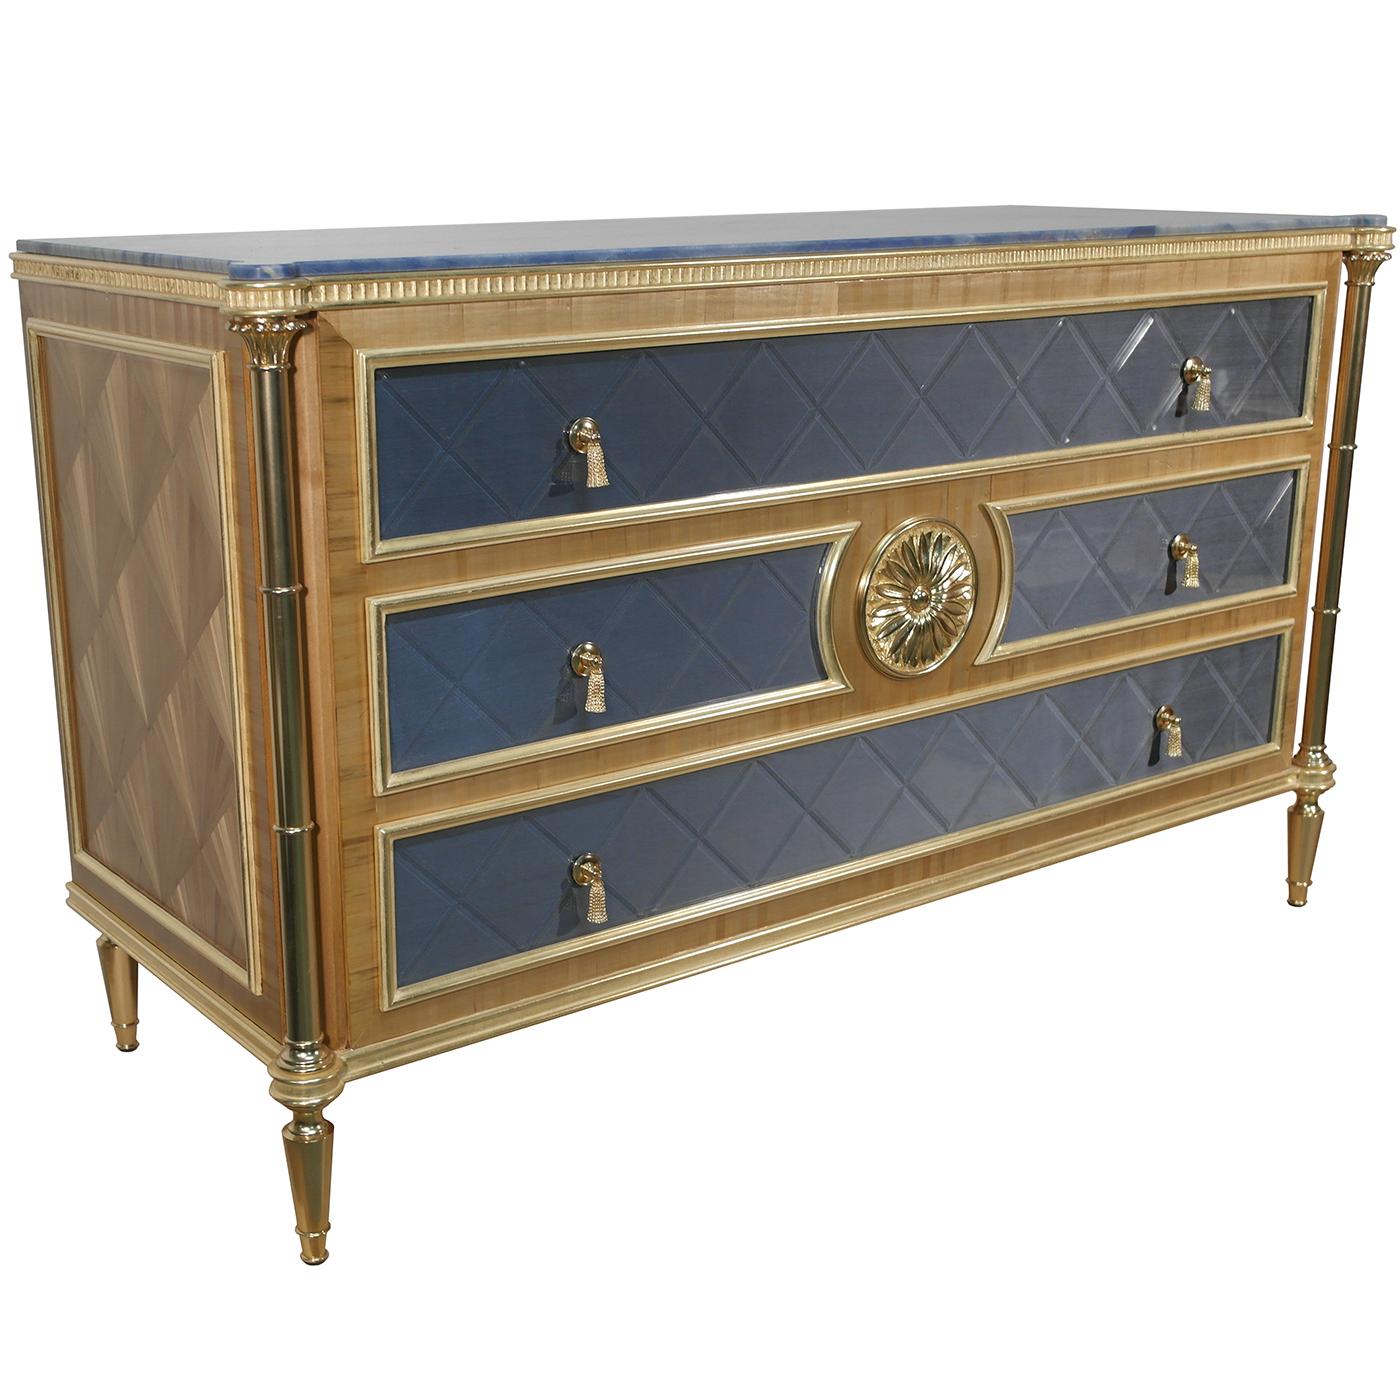 This solid wood chest of drawers is characterized by an extravagant design, boasting a glossy finish and natural straw veneer accents. Opulent brass accents flaunt a 22-karat gold-plated finish and the 22-karat gold leaf accents feature a light